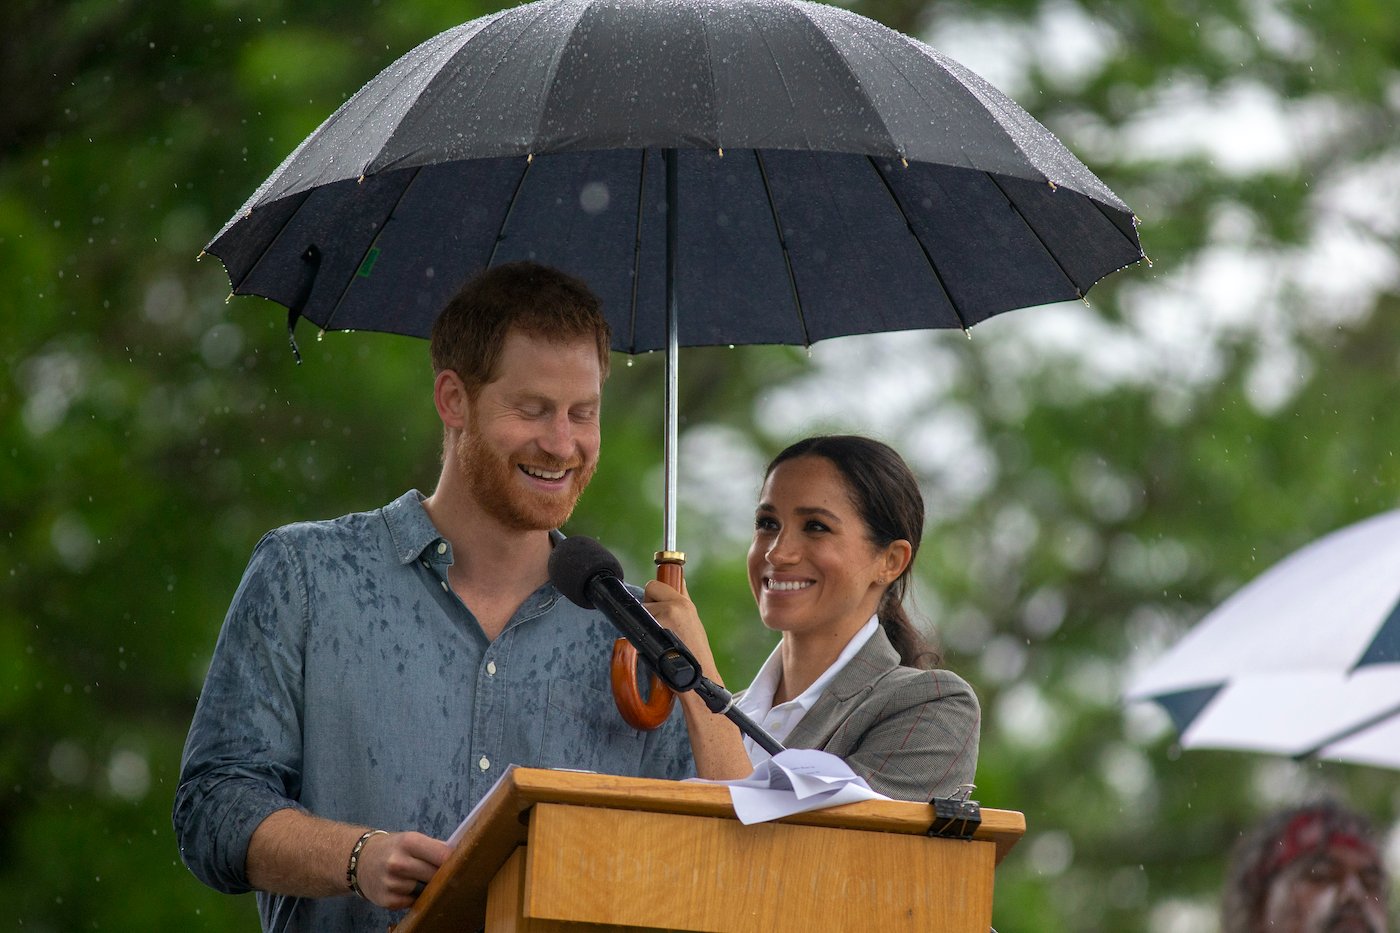 Meghan Markle holds an umbrella for Prince Harry while he gives a speech in Dubbo, Australia